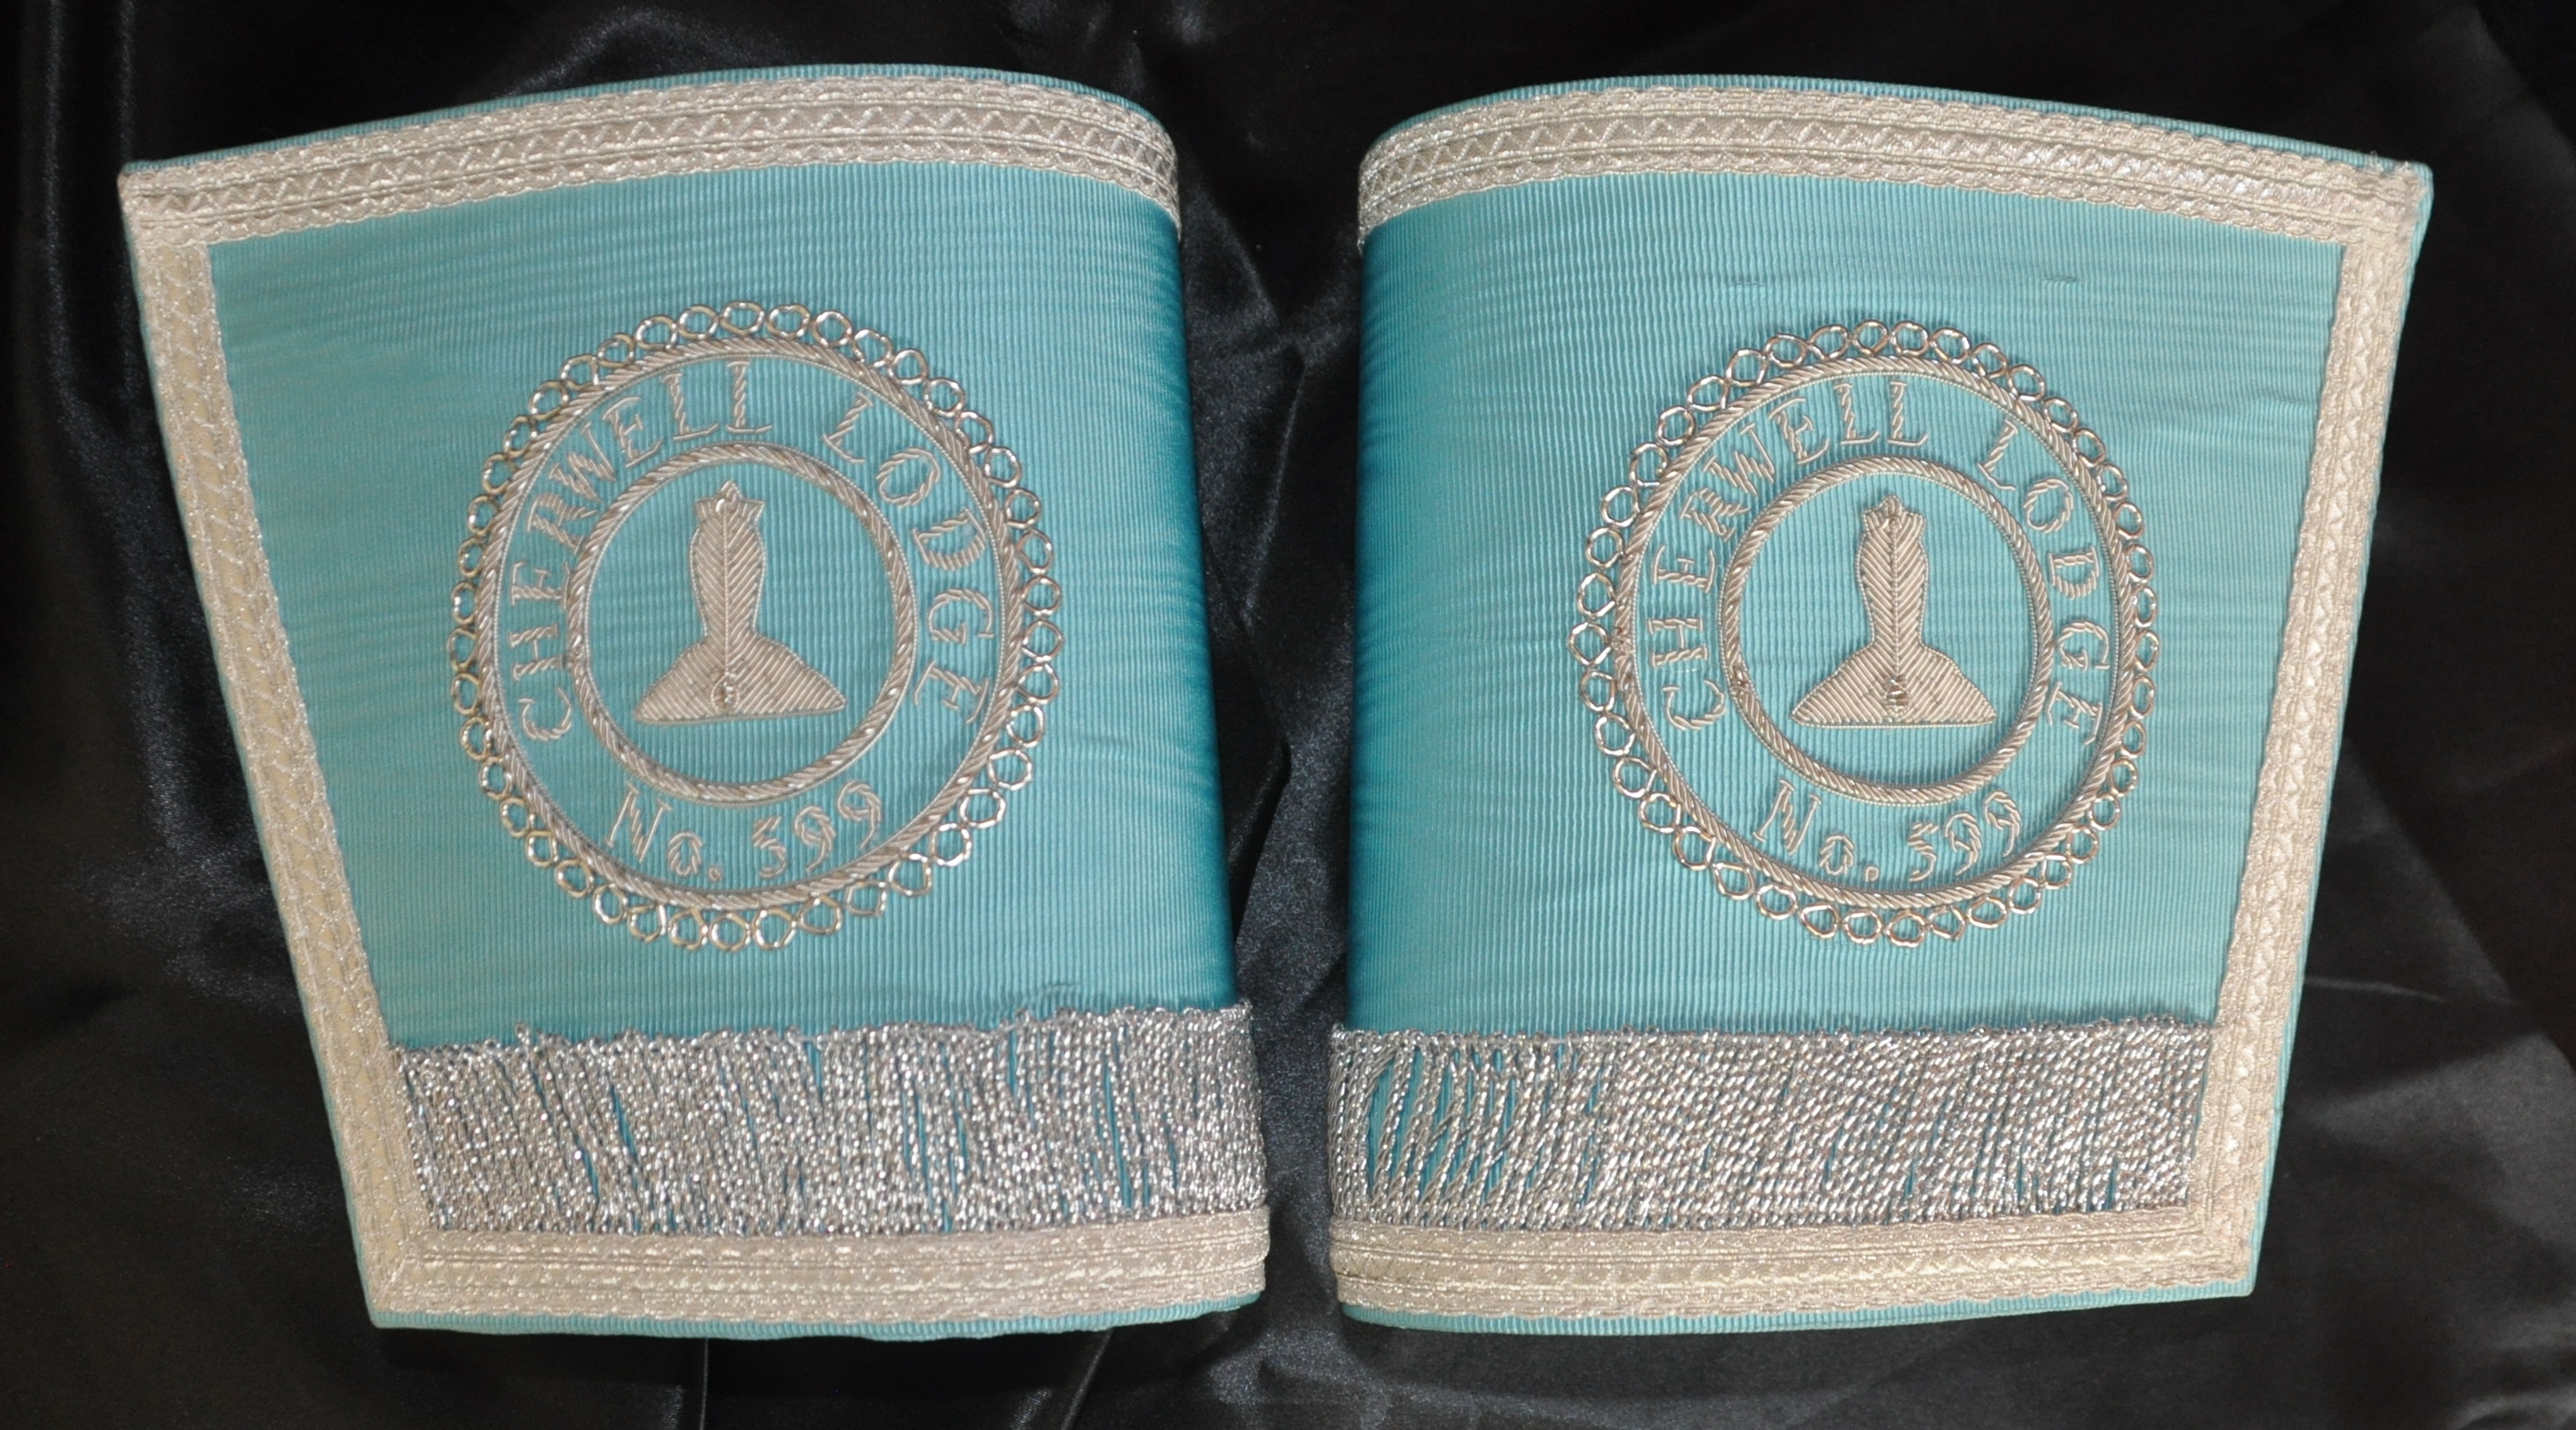 Craft Lodge Officers Gauntlets with Lodge Name & No.